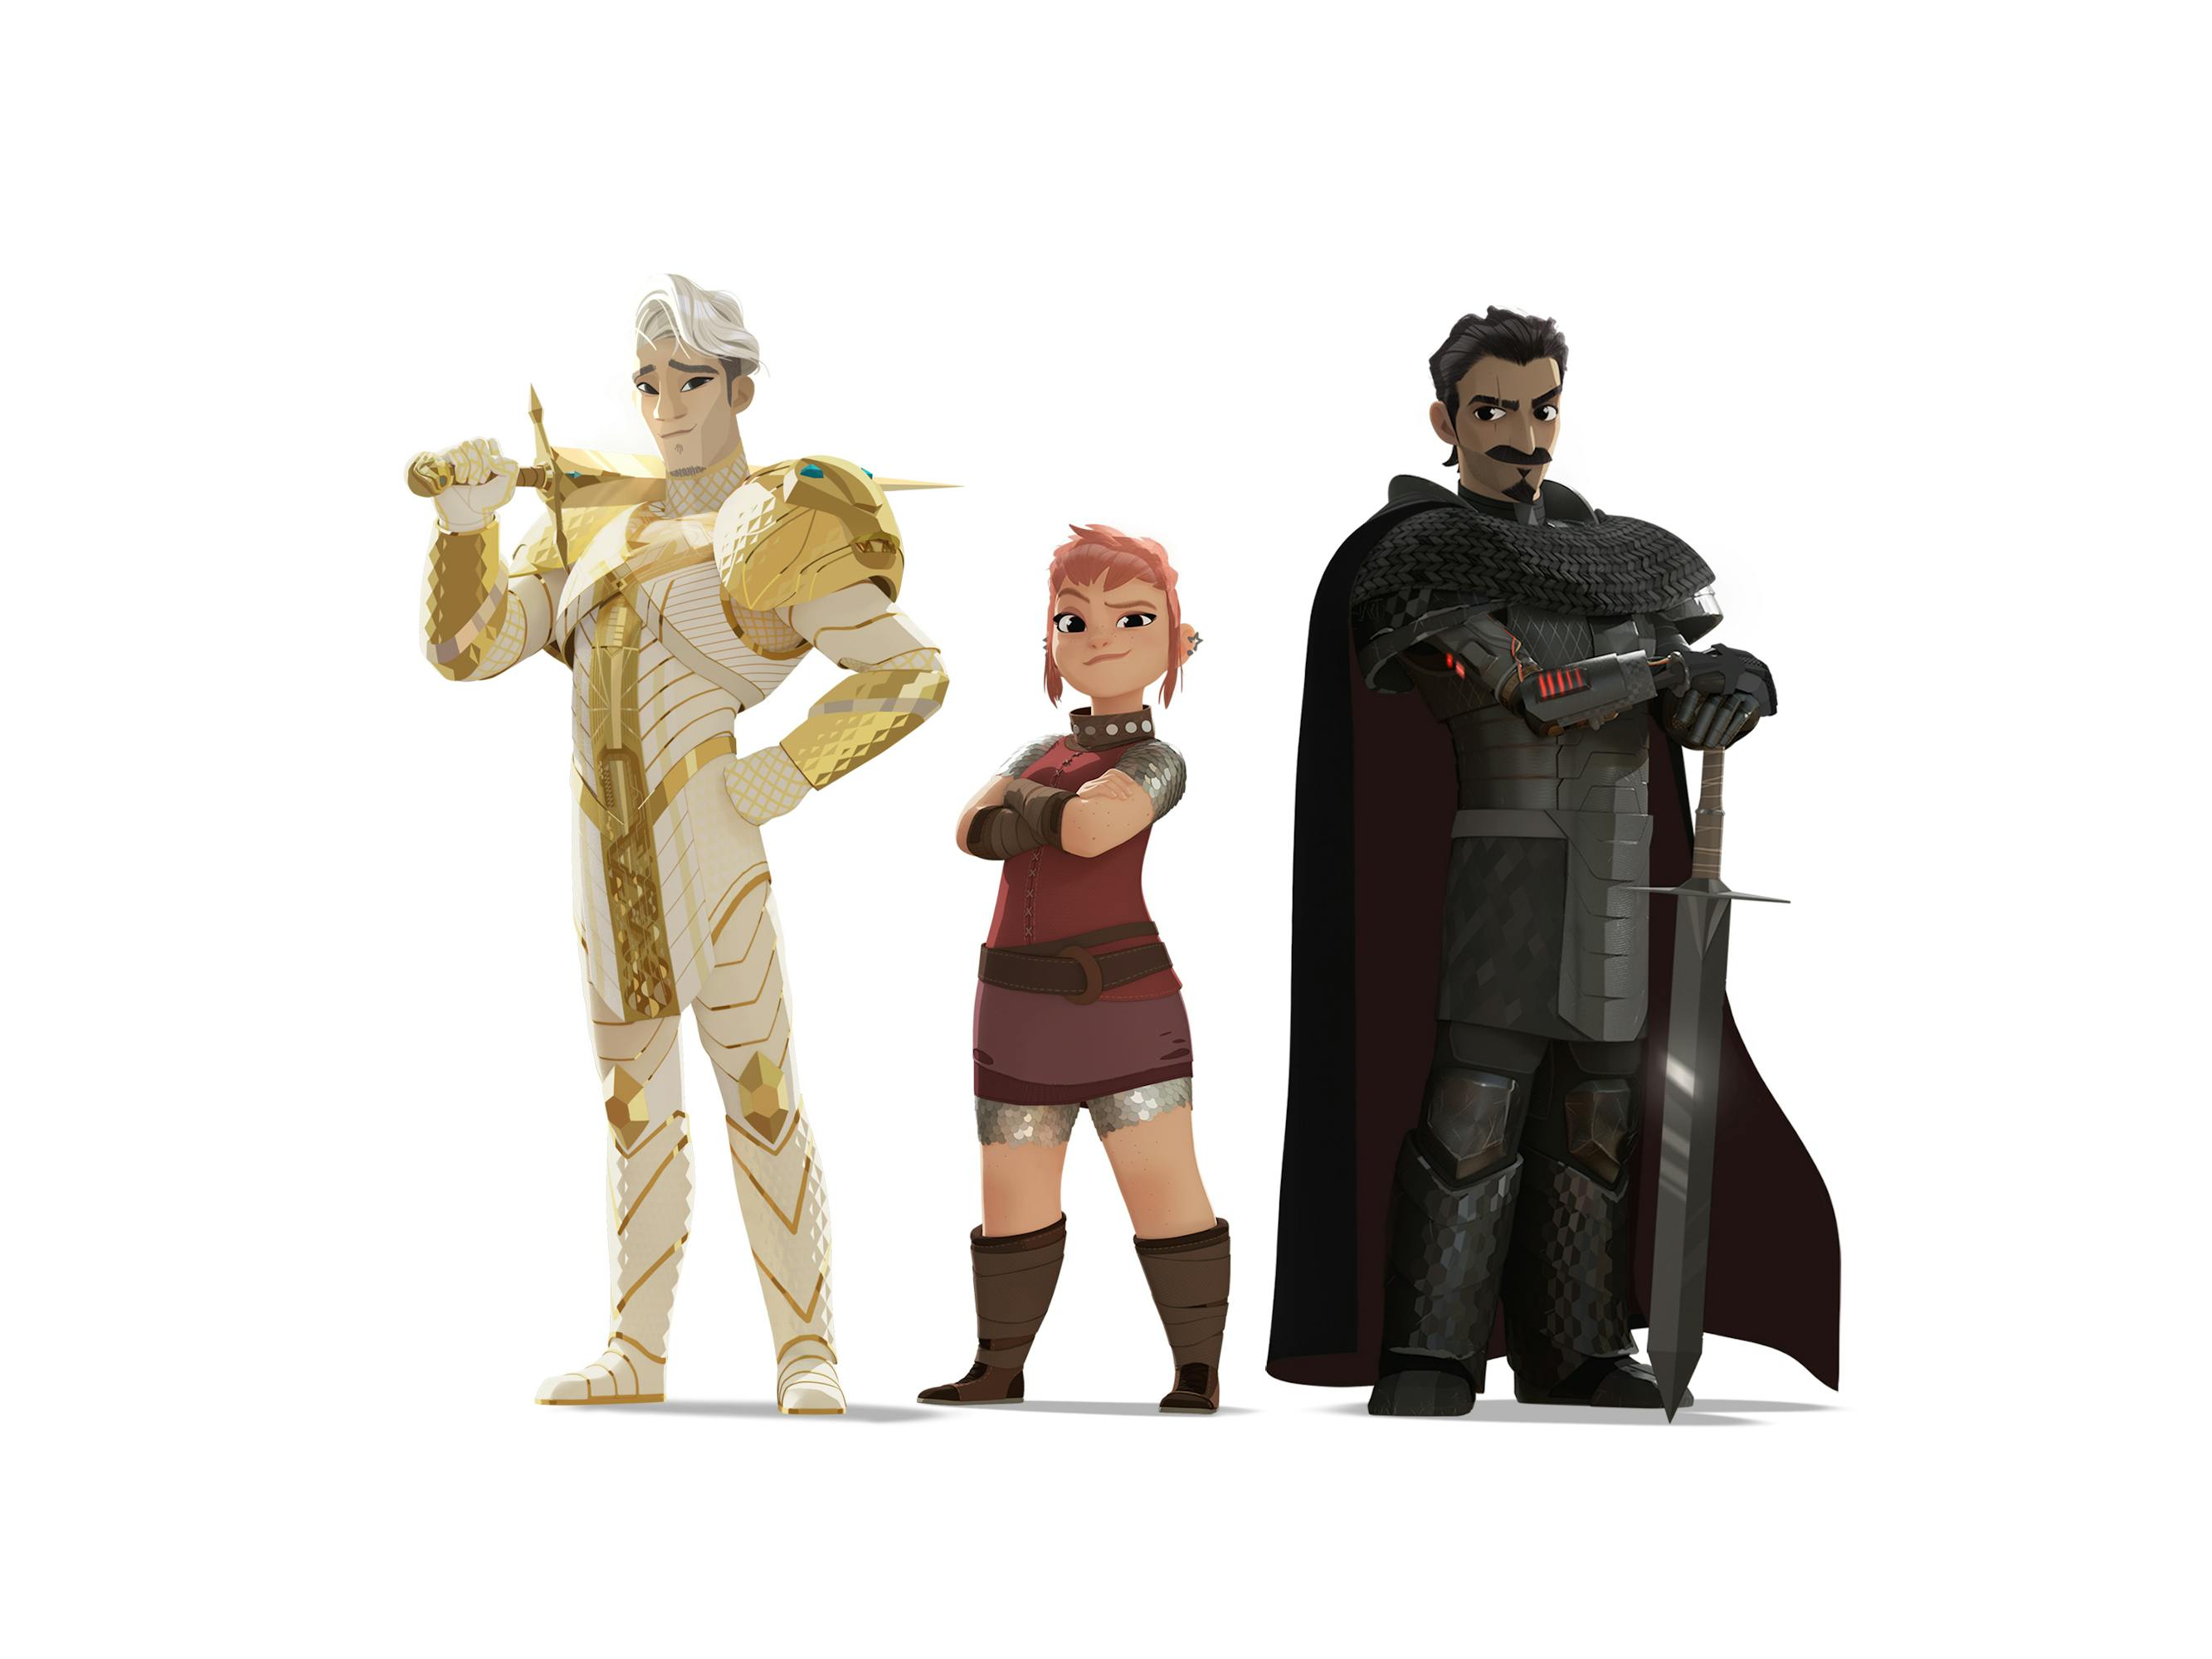 Sir Ambrosius Goldenloin, Nimona, and Lord Ballister Boldheart as they appear in the movie.